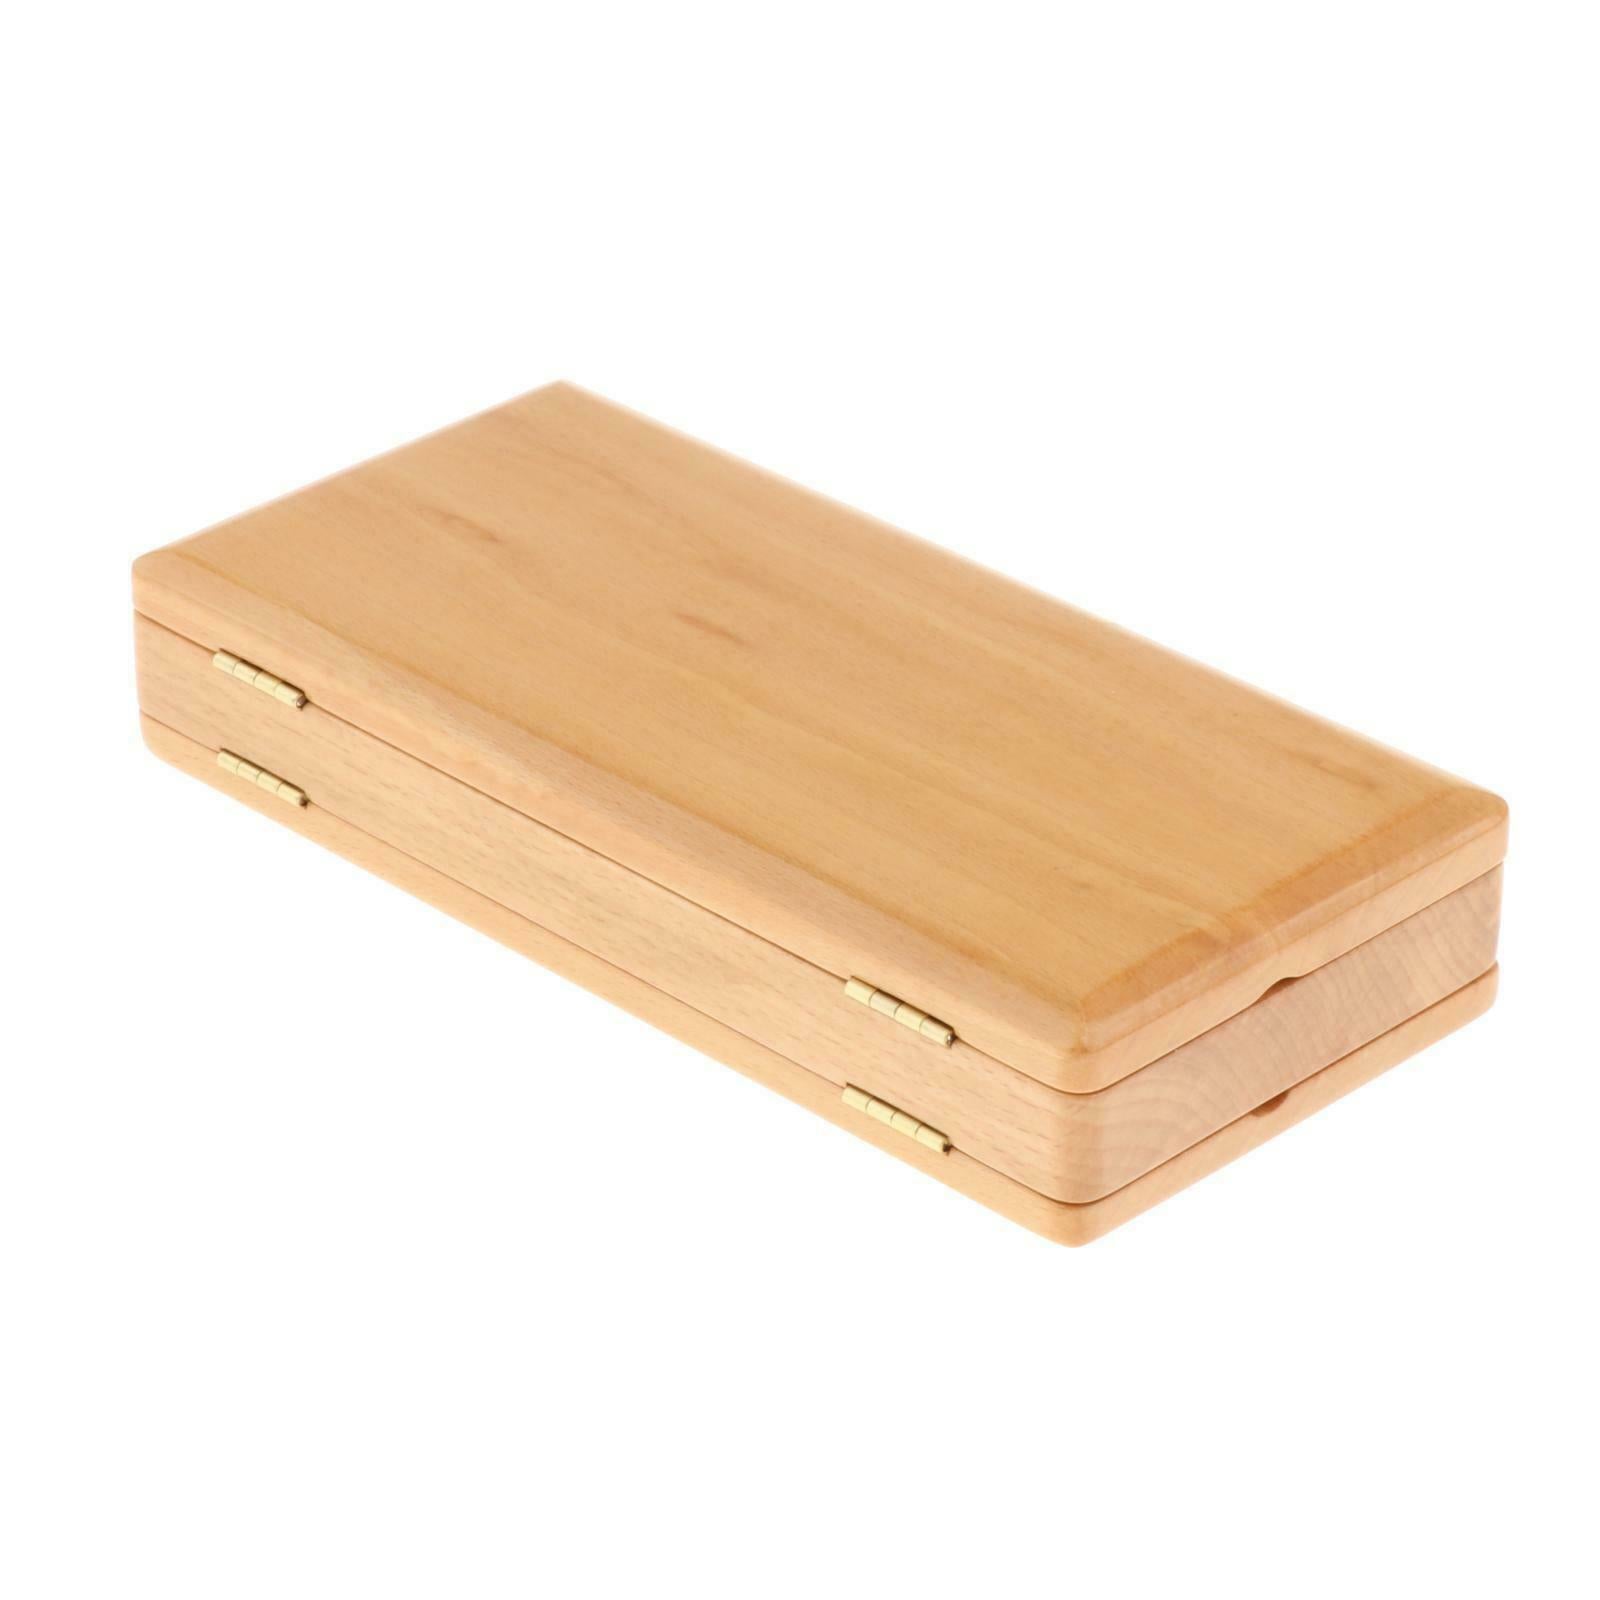 Portable Solid Wood Oboe Reed Case Wooden Holder Box for Oboe 40pcs Reeds